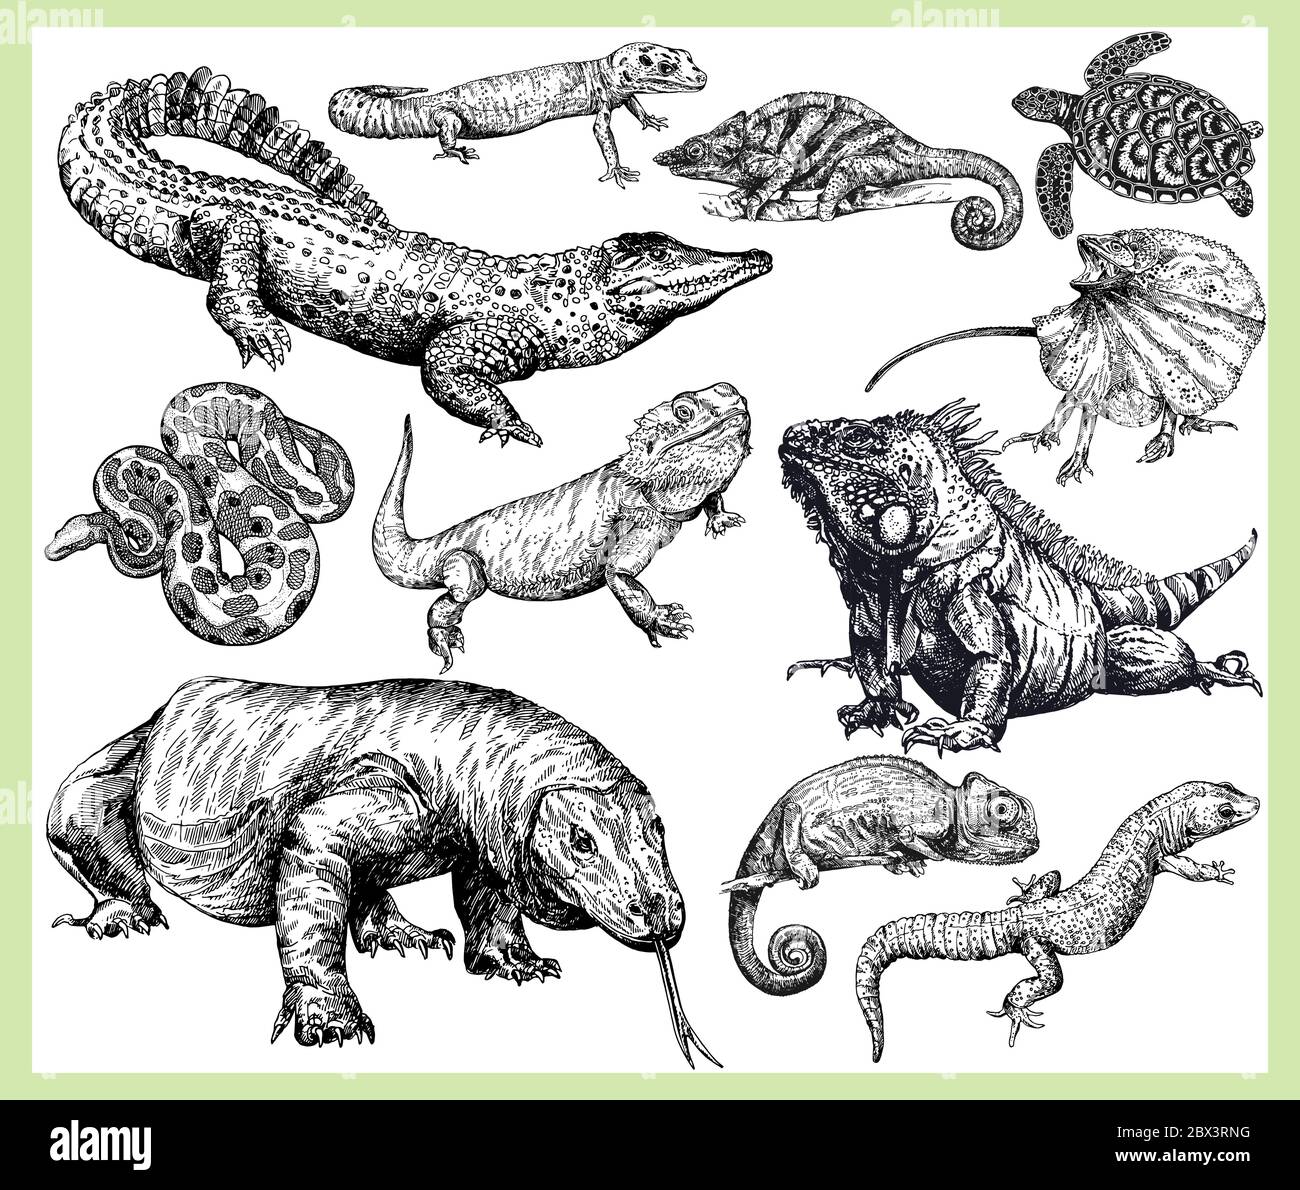 Big set of hand drawn sketch style reptiles isolated on white background. Vector illustration. Stock Vector